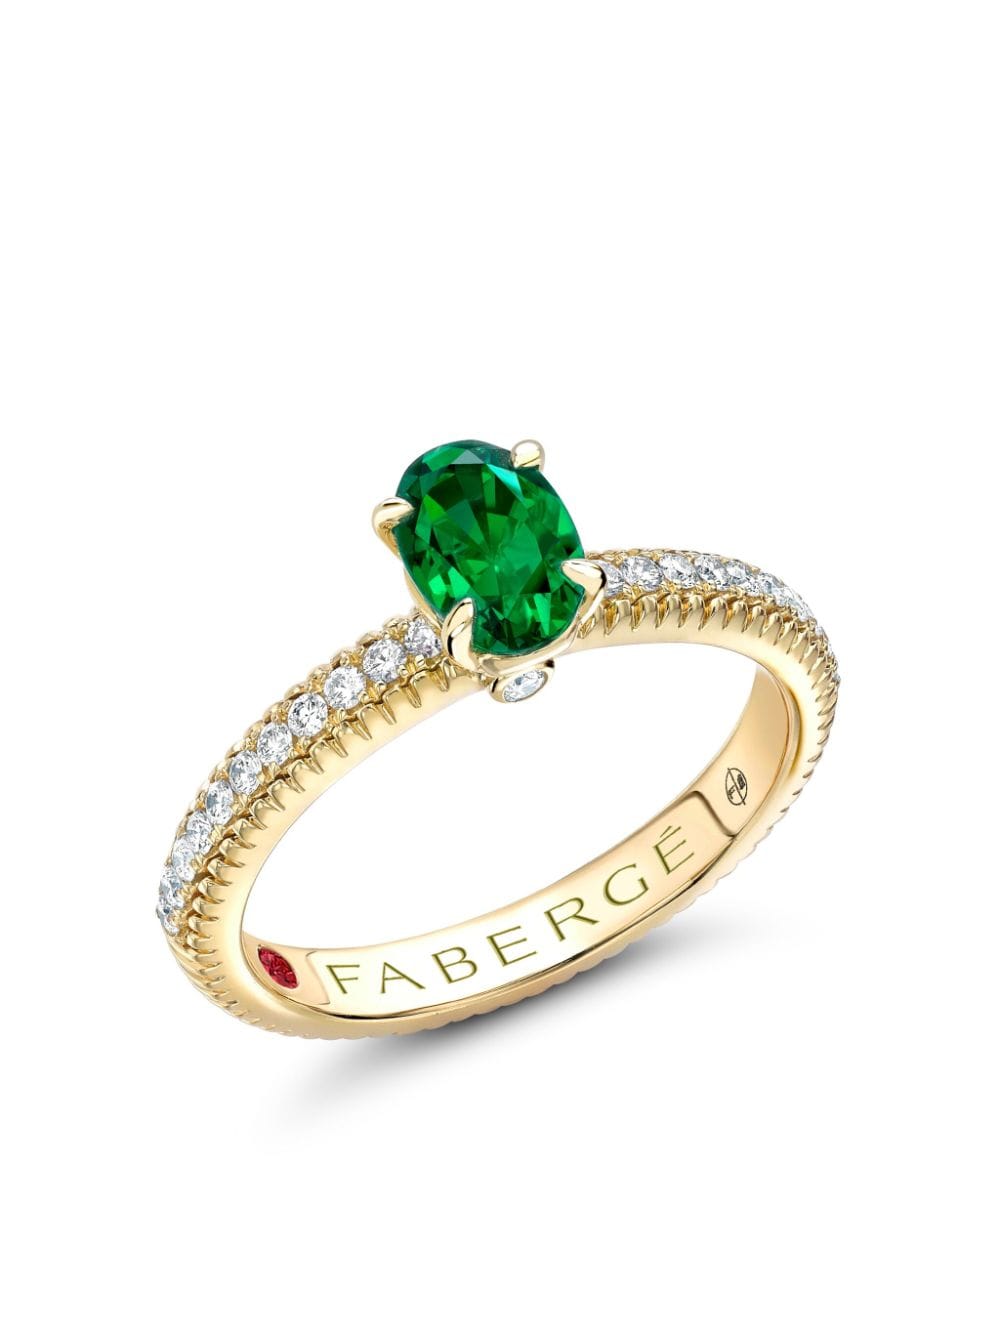 Fabergé 18kt yellow gold Colour Of Love emerald and diamond ring - Green von Fabergé